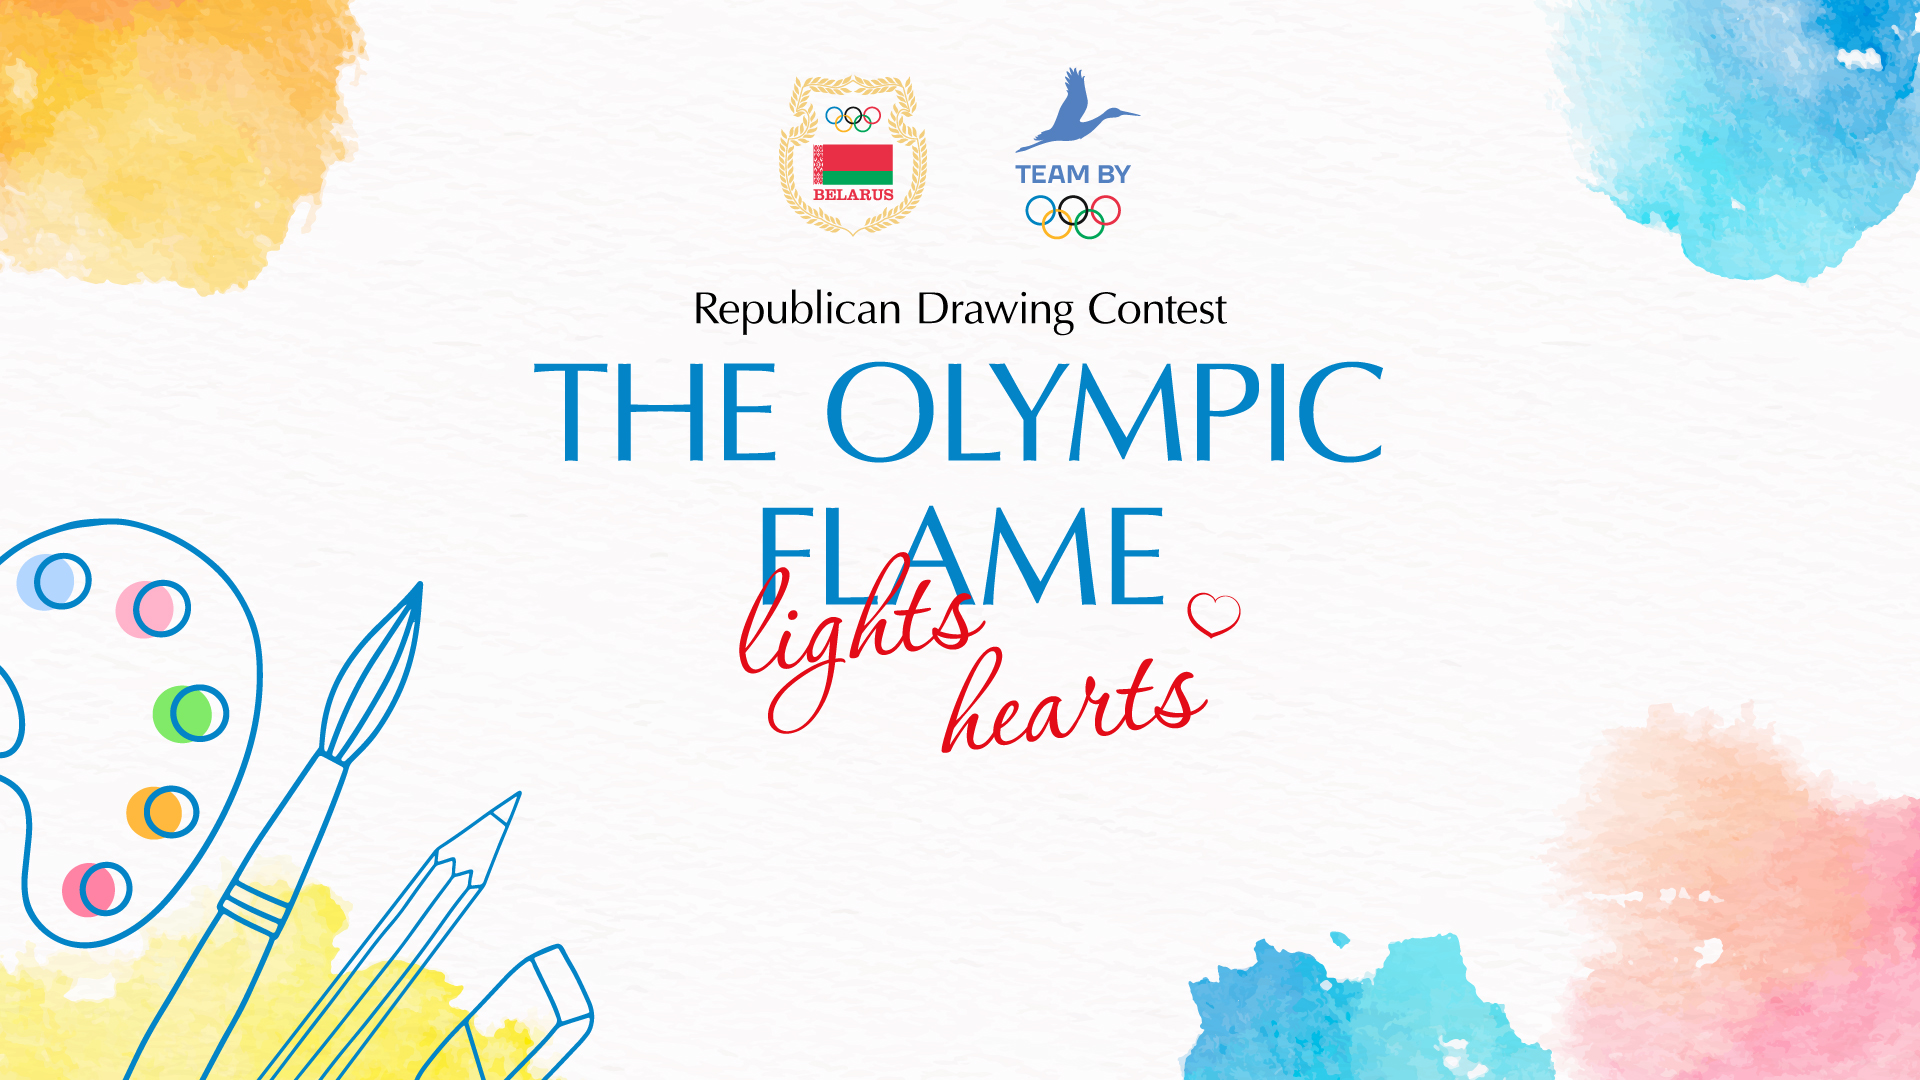 Republican Drawing Contest 2020: “The Olympic Flame lights the Hearts” is announced by the NOC Belarus